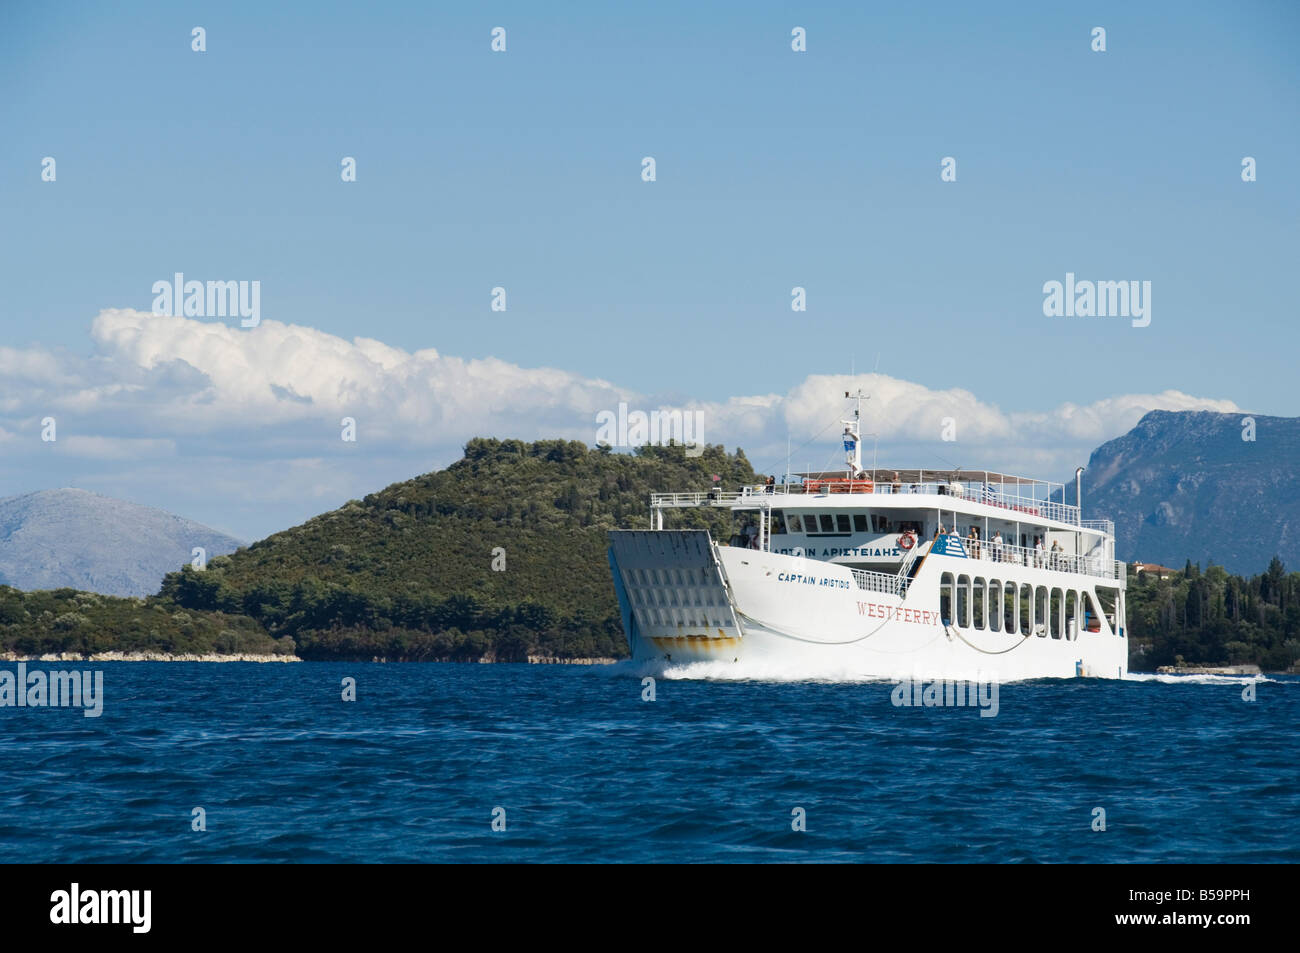 Ferry passing the Island of Skorpios owned by the Onassis family, near Lefkada (Lefkas), Ionian Islands, Greek Islands, Greece Stock Photo